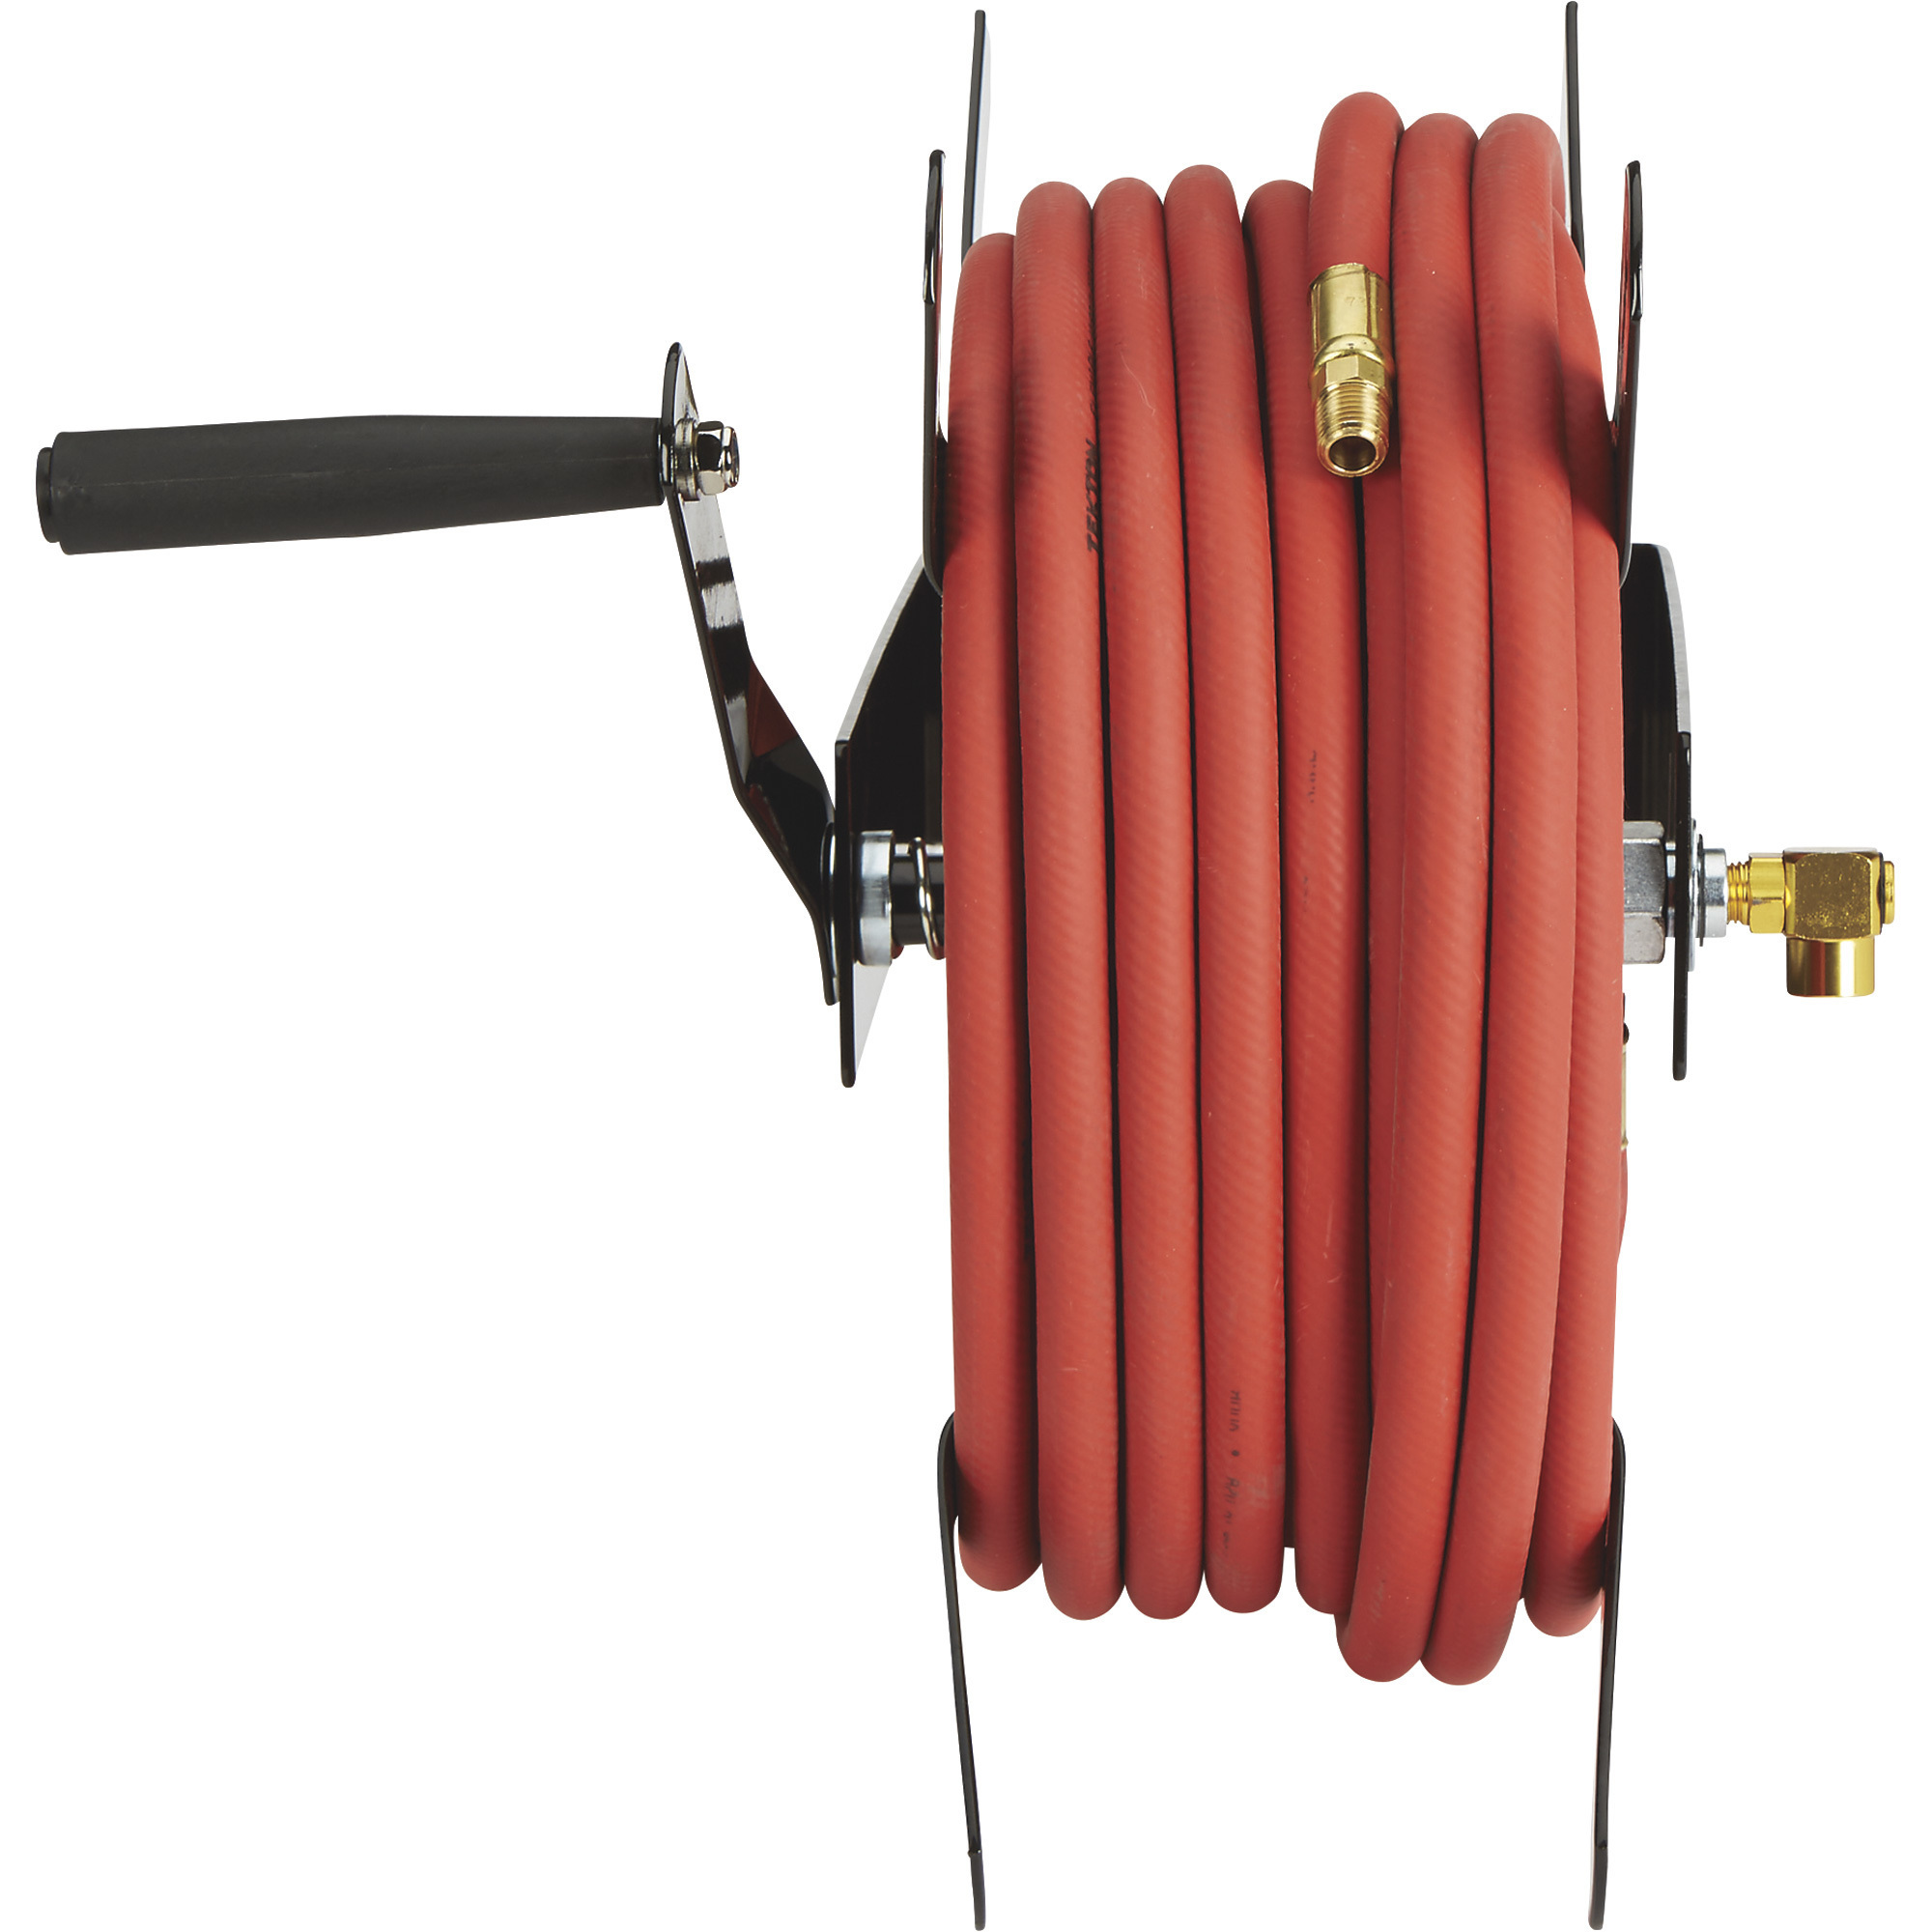 Ironton Wall-Mount Air Hose Reel, Holds 3/8in. x 100ft. Hose, Max